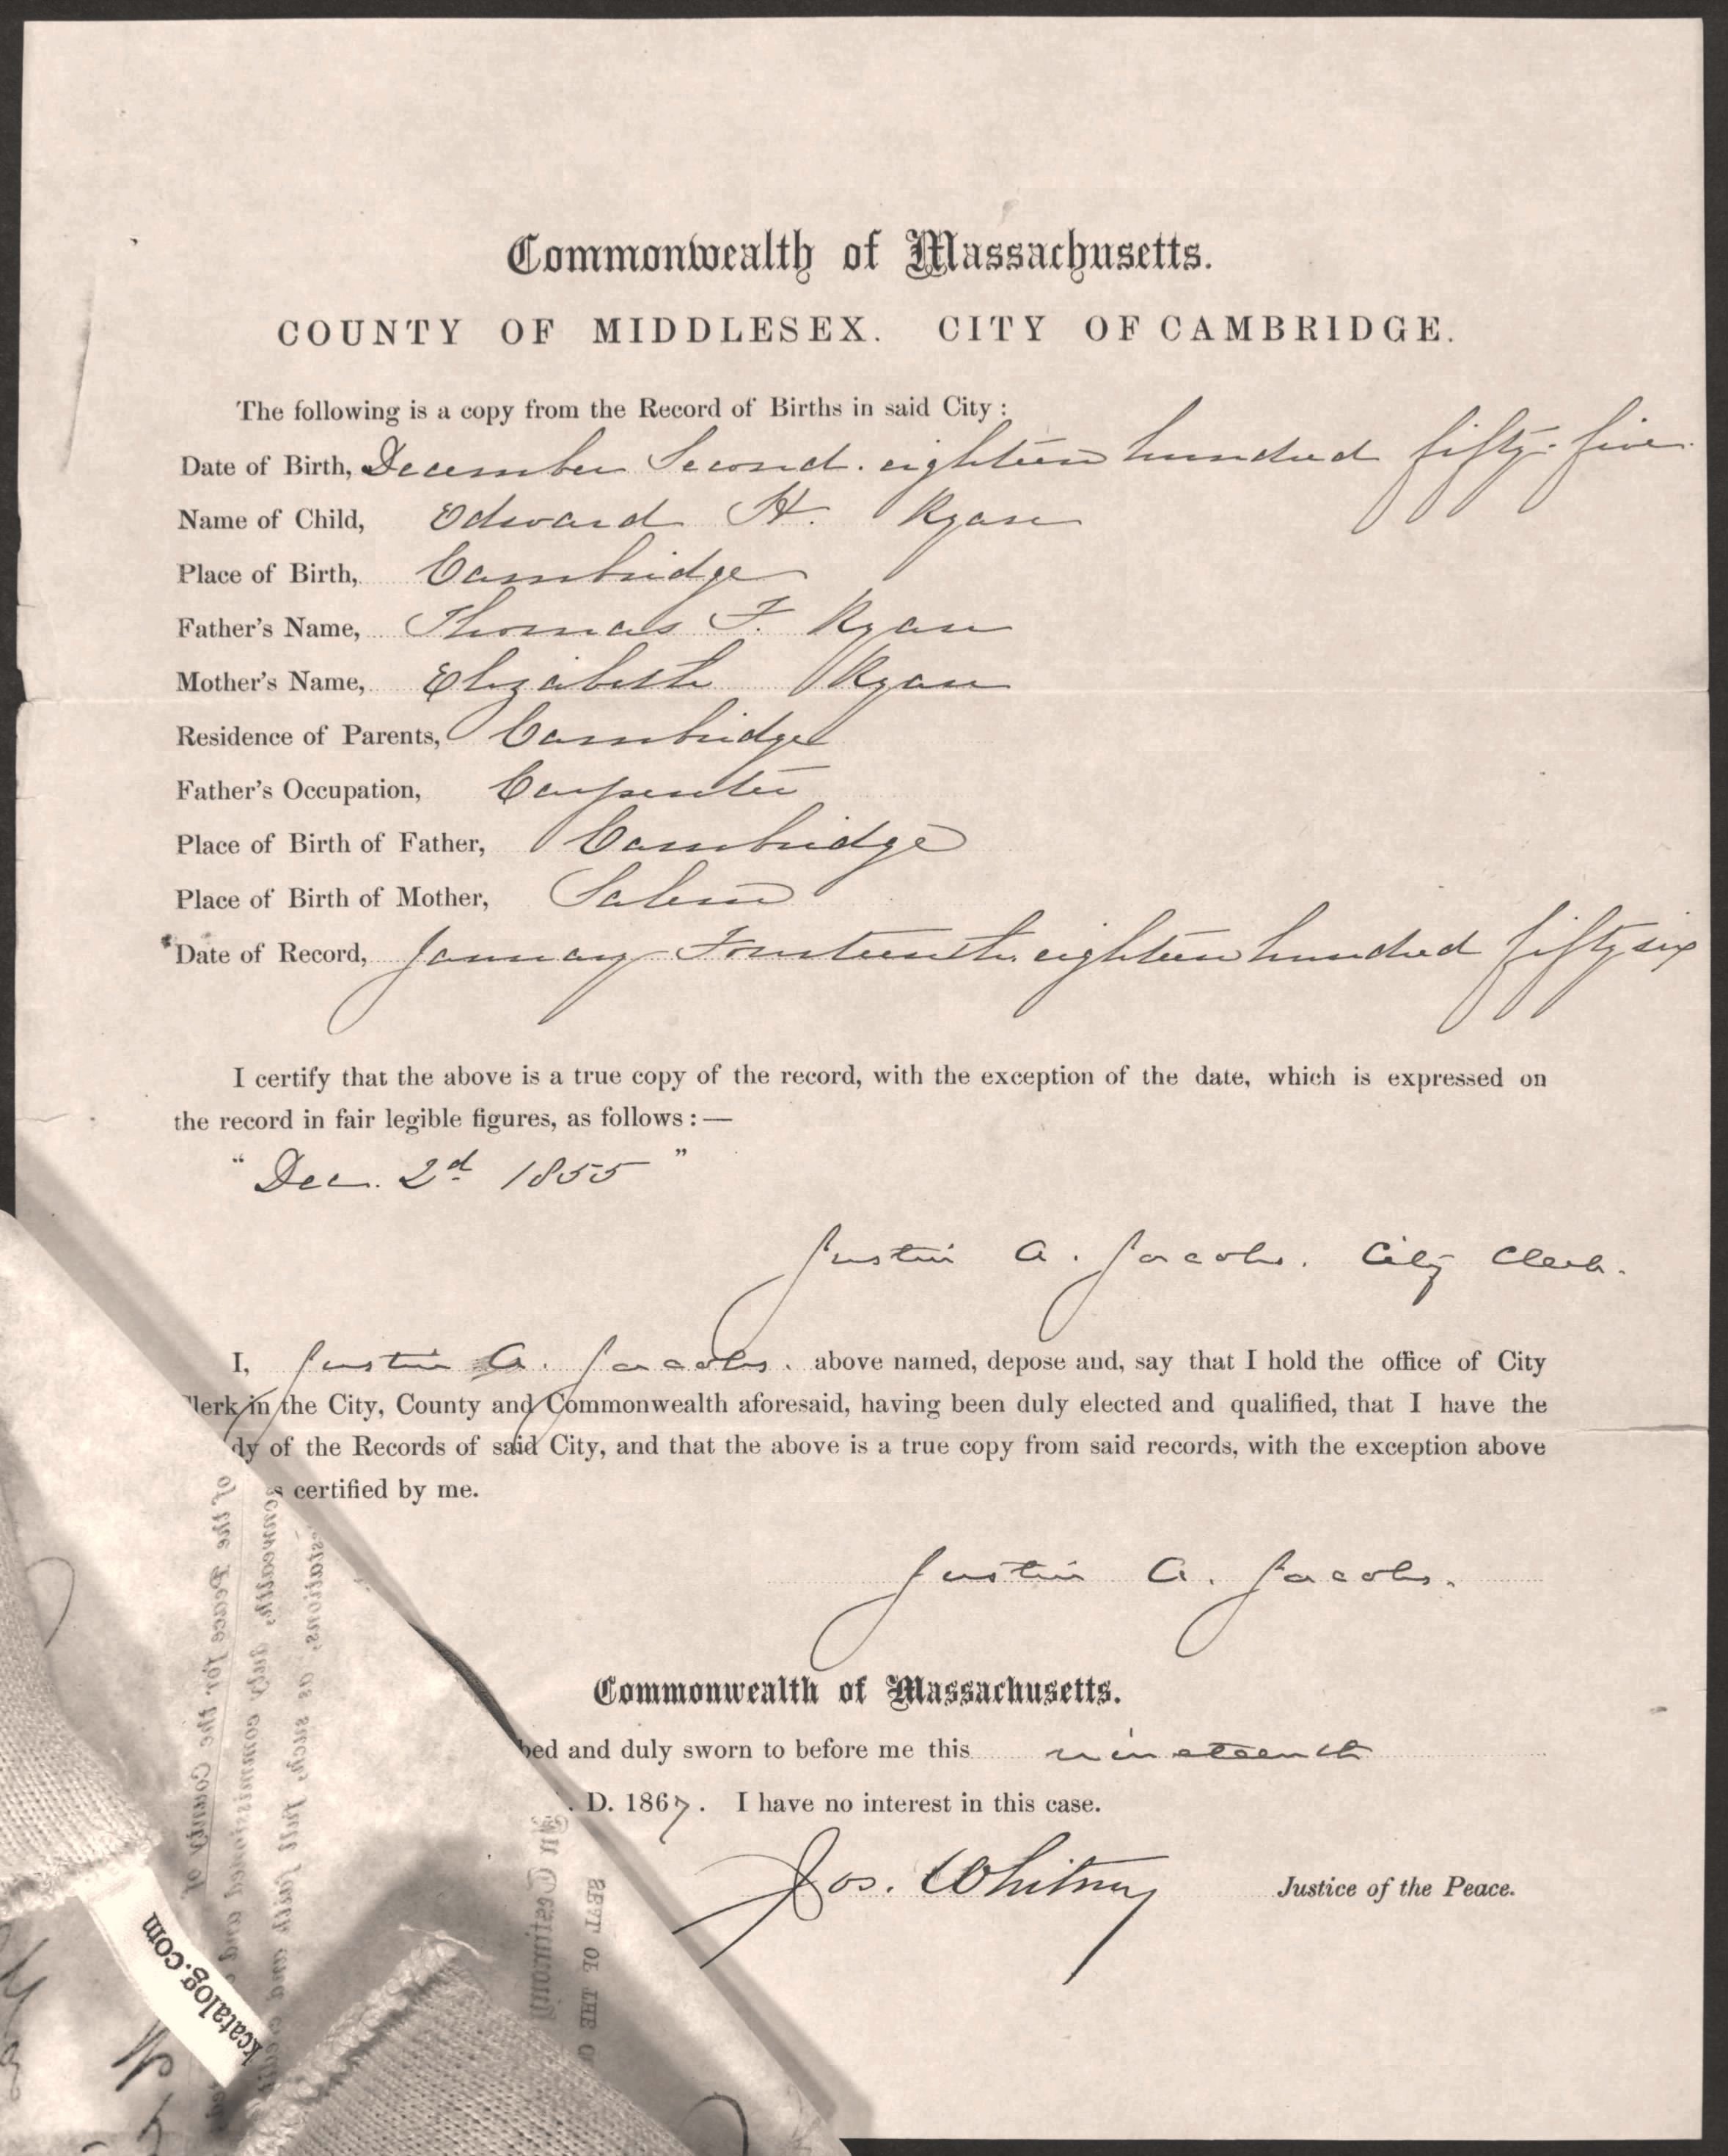 Example of a recruit's birth certificate